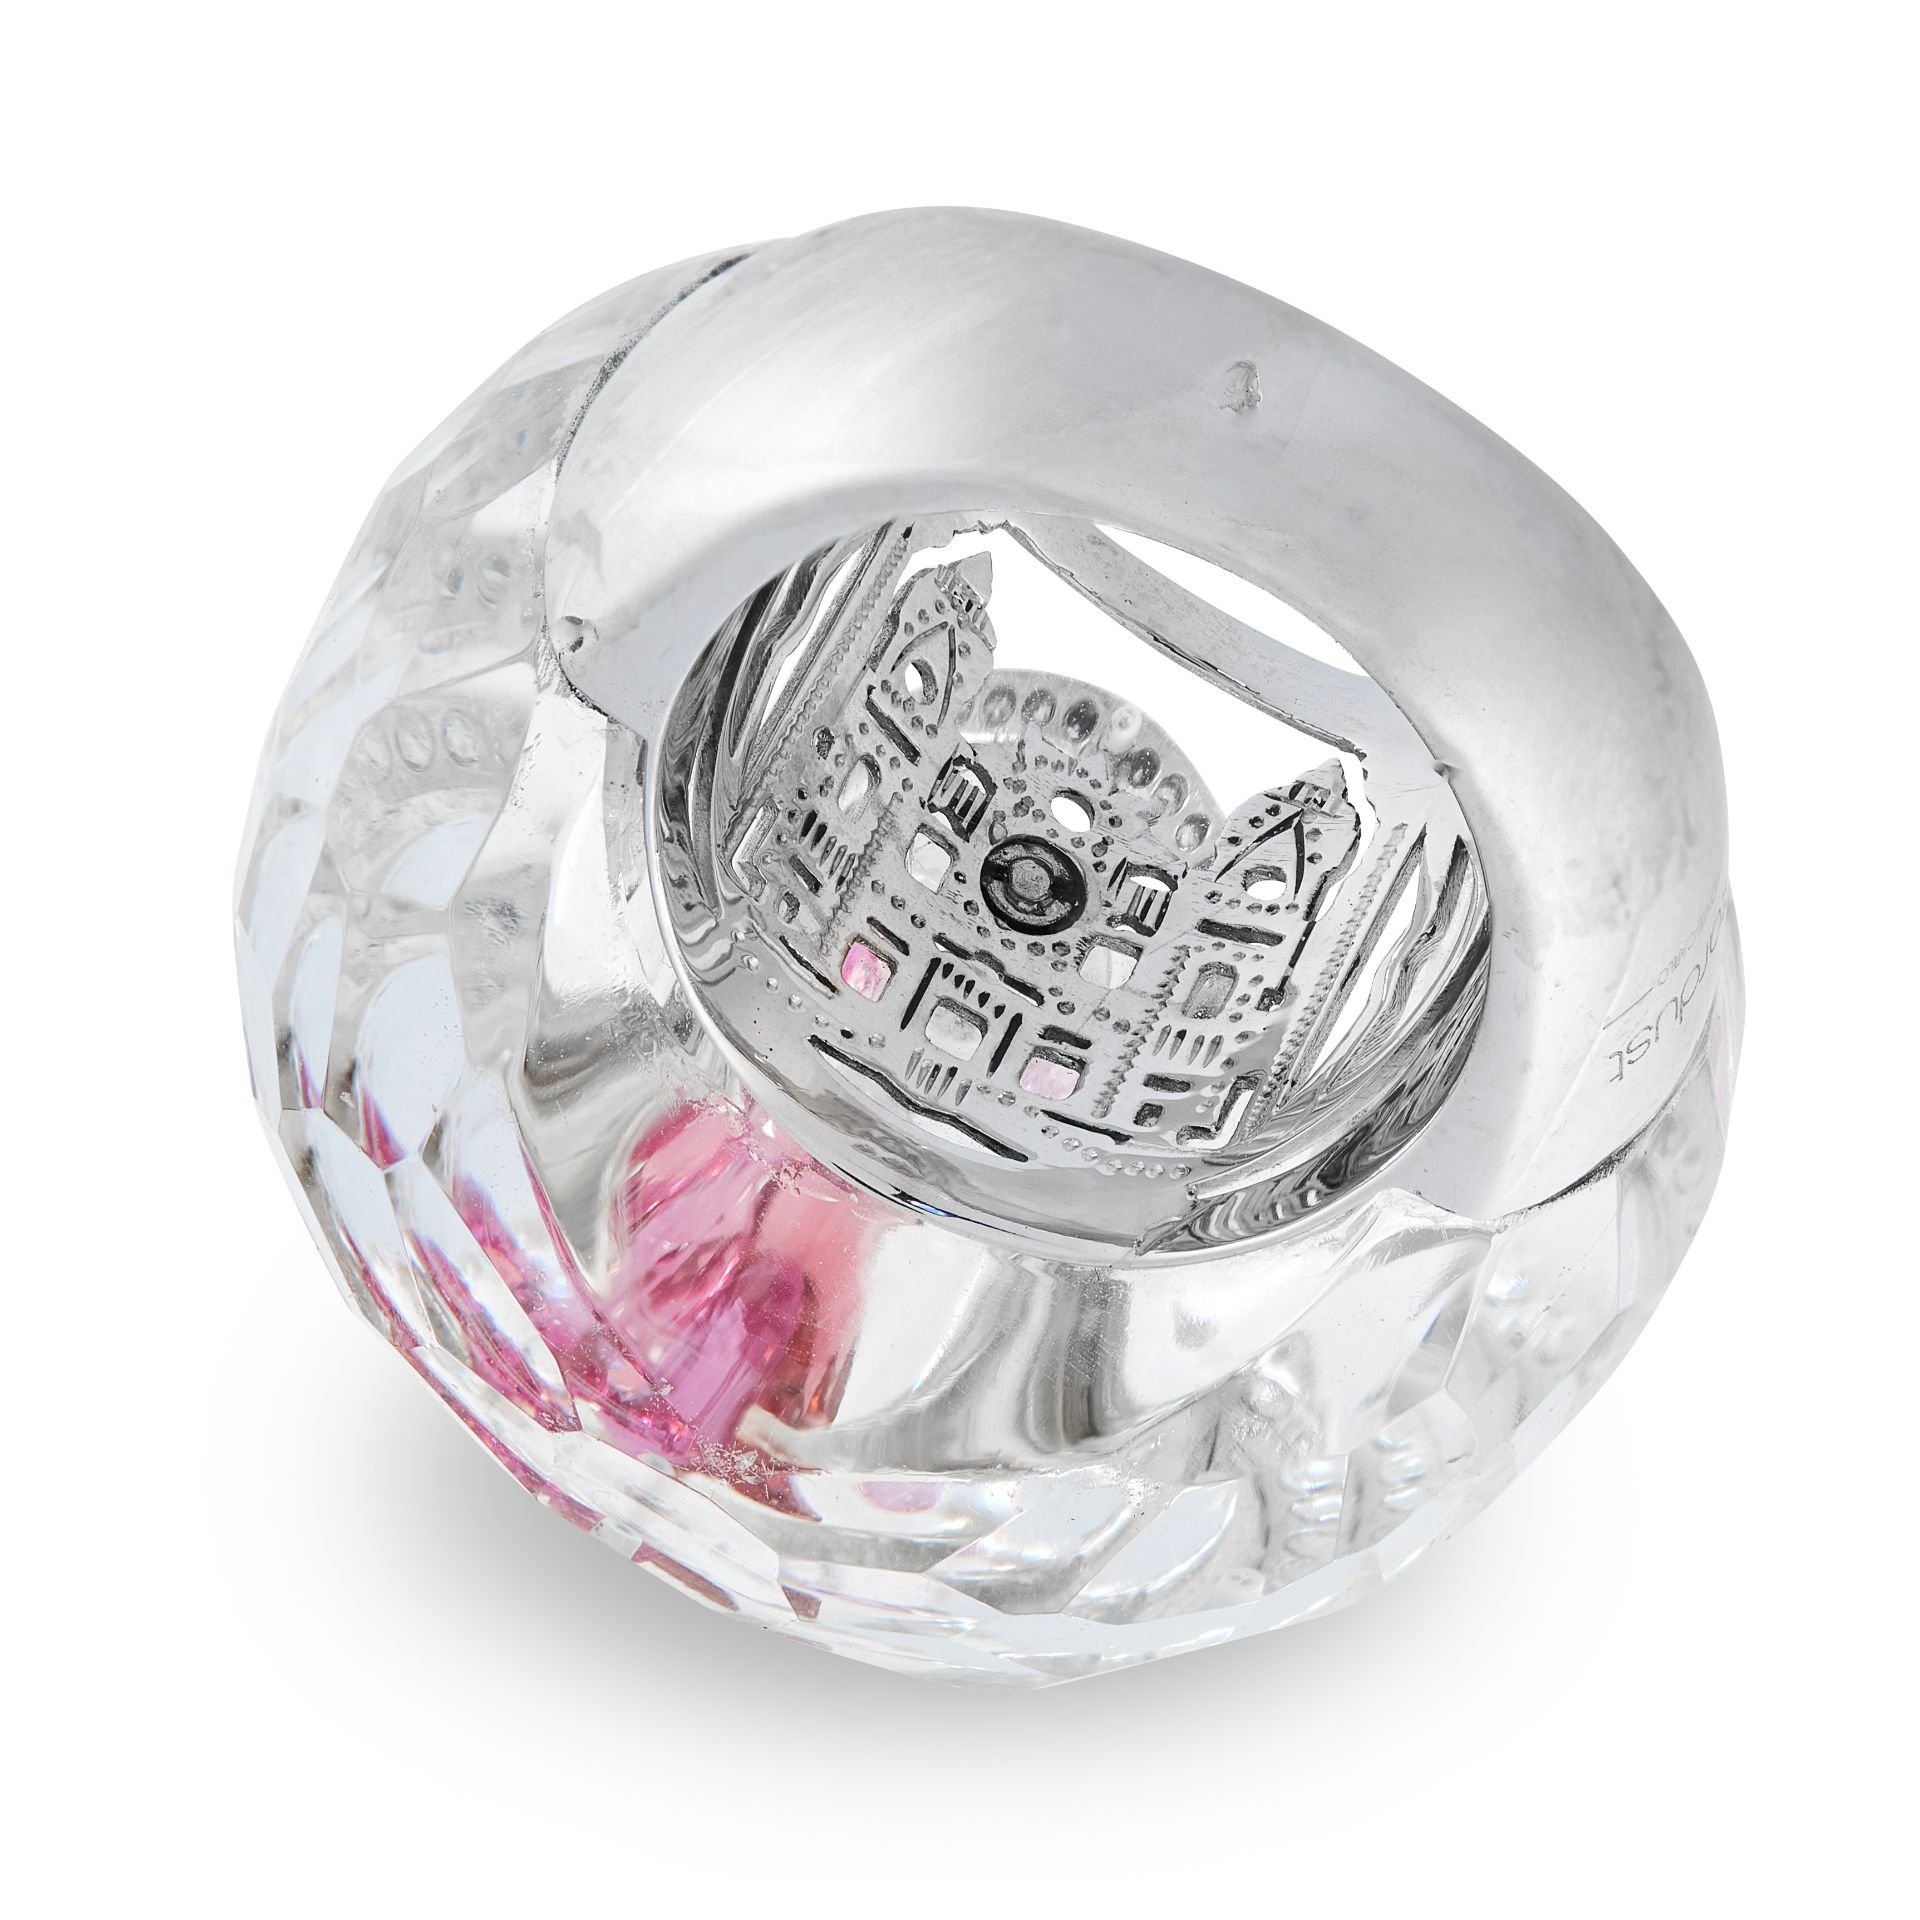 A DIAMOND, CARVED ROCK CRYSTAL AND PINK SAPPHIRE COCKTAIL RING in 18ct white gold, the carved rock - Bild 2 aus 2